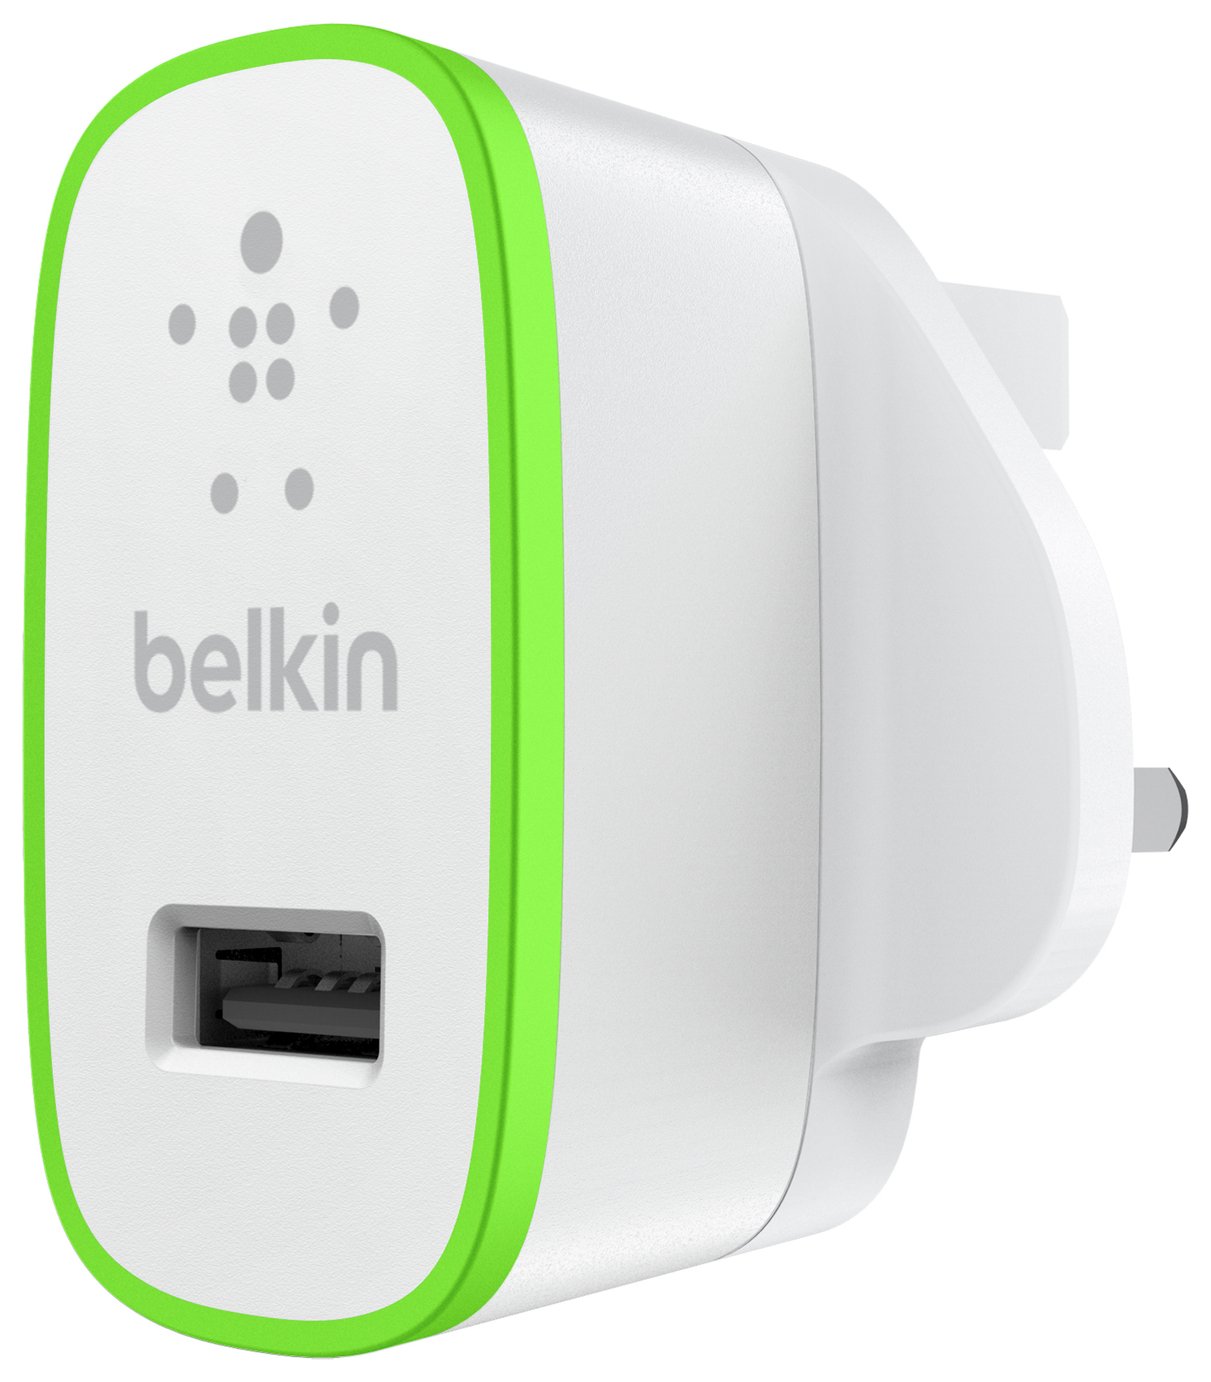 Belkin 12W Universal Wall Charger - White